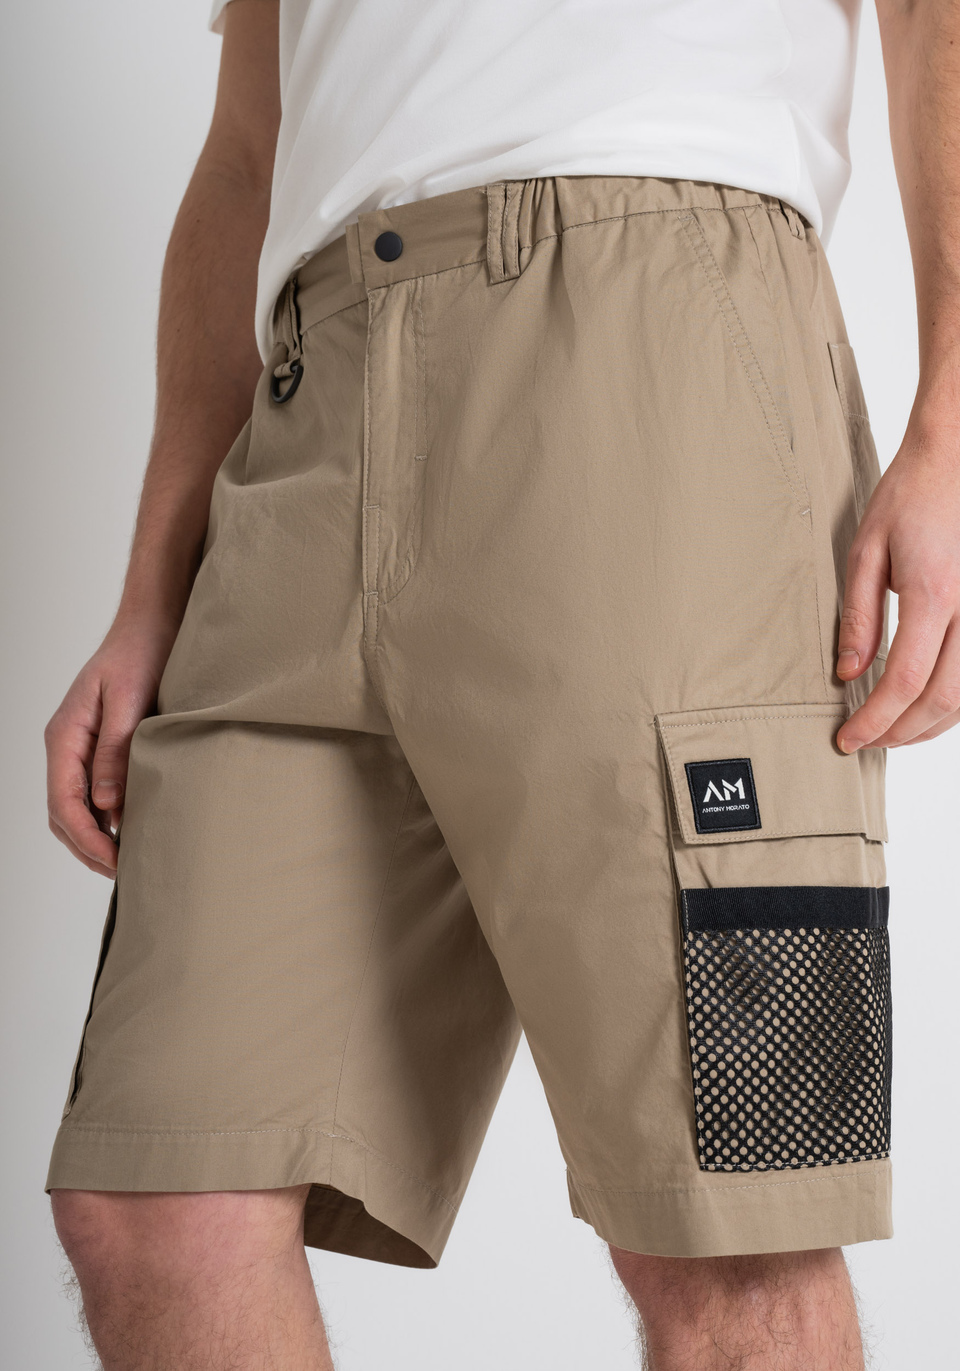 REGULAR FIT COTTON TWILL SHORTS WITH LOGO PATCH - Antony Morato Online Shop